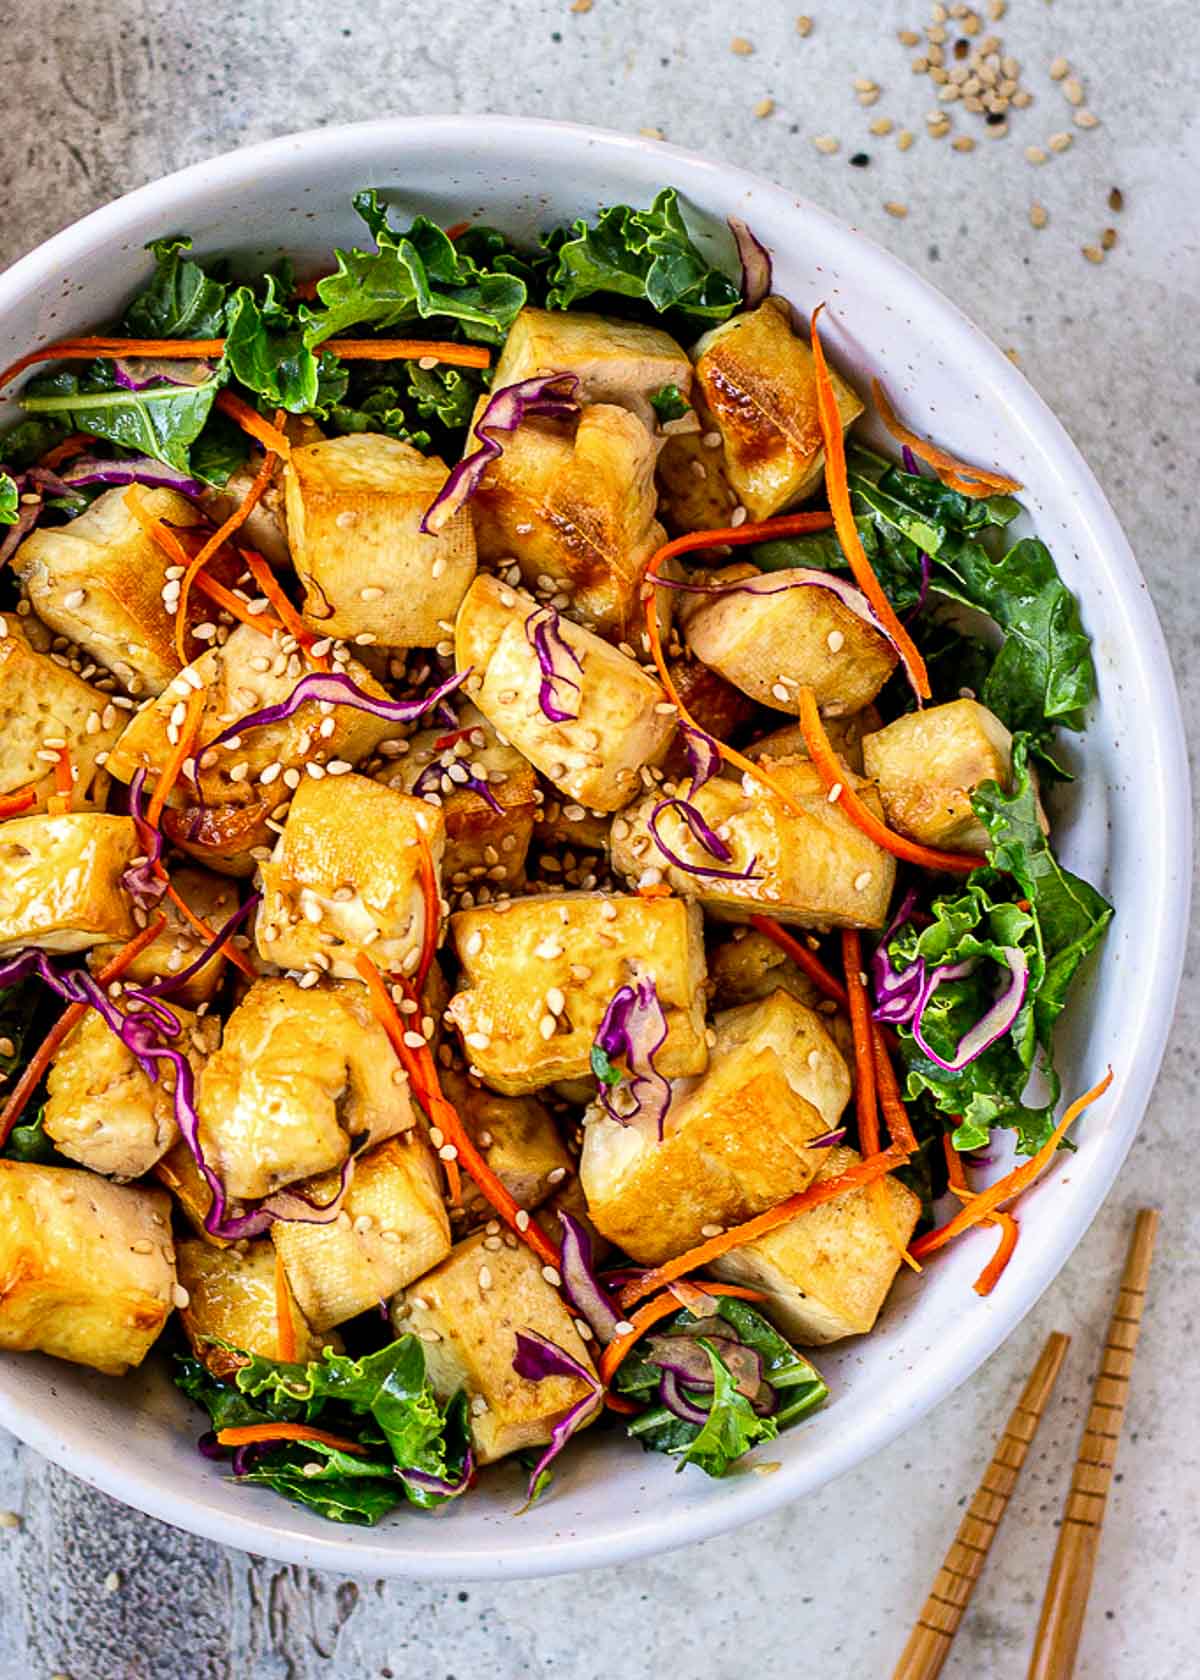 Bowl of crispy tofu surrounded by green leaves, red cabbage, carrots and chopsticks.